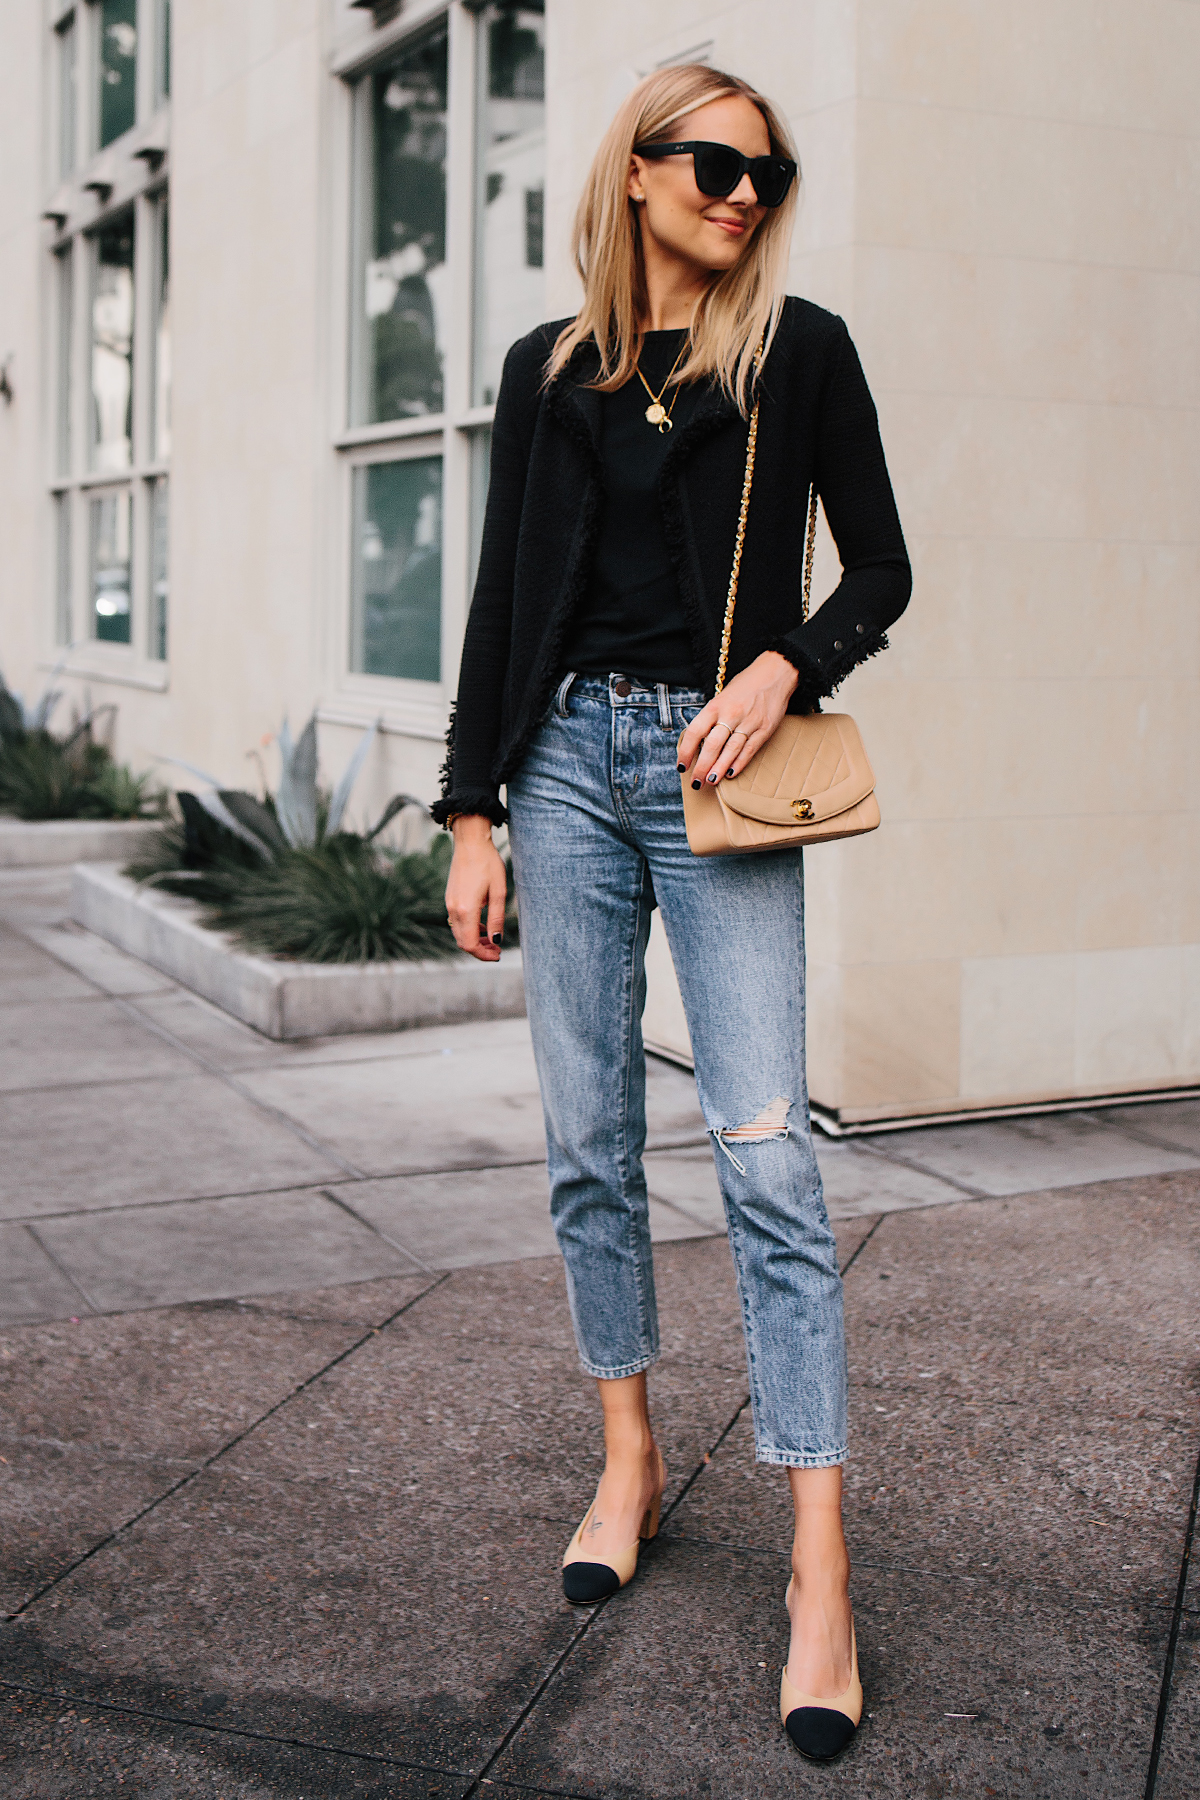 Blonde Woman Wearing Black Tweed Relaxed Jacket Jeans Outfit Chanel Tan Diana Handbag Chanel Slingback Shoes Fashion Jackson San Diego Fashion Blogger Street Style